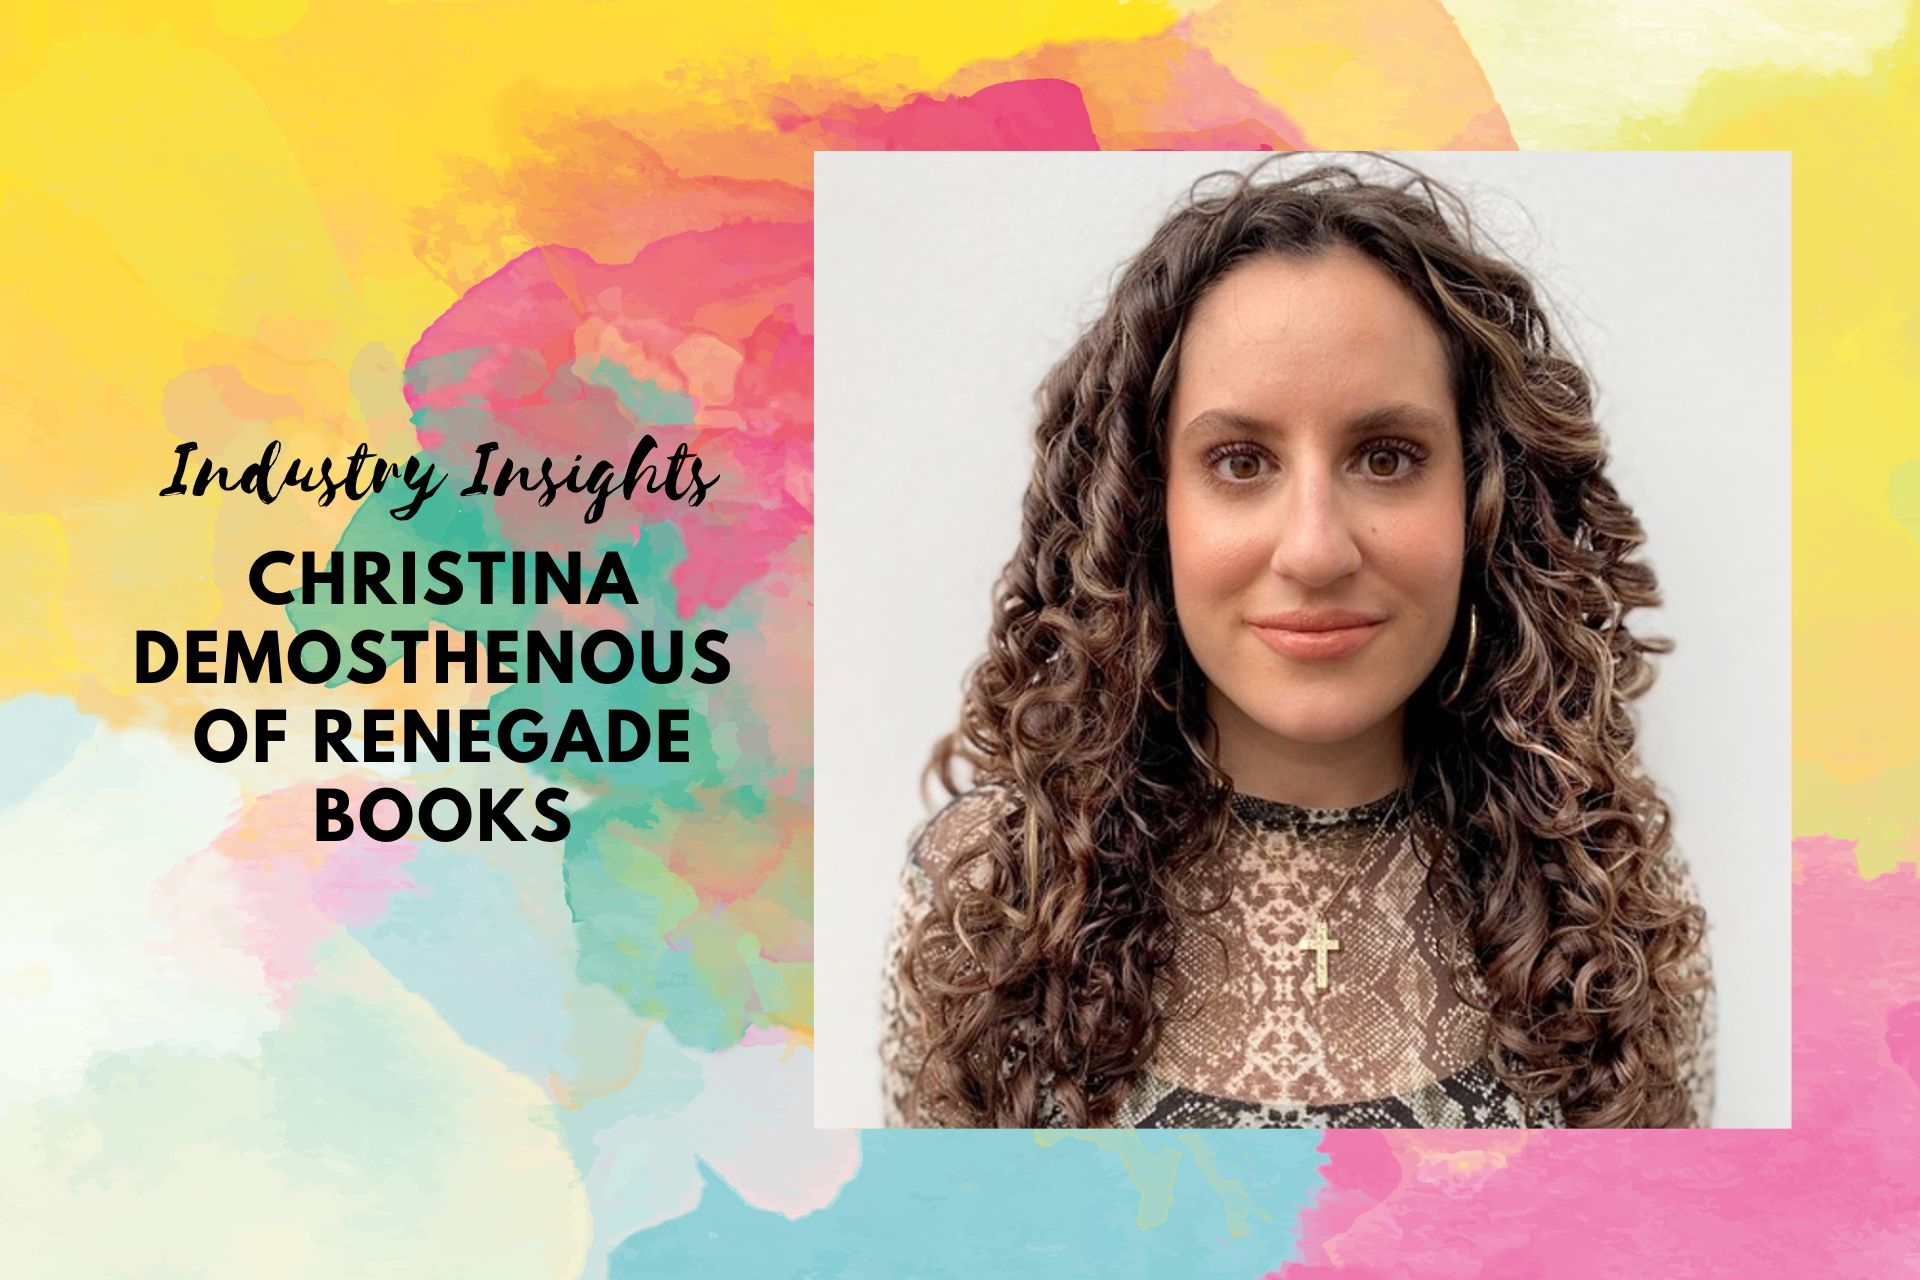 Industry Insight: Christina Demosthenous of Renegade Books